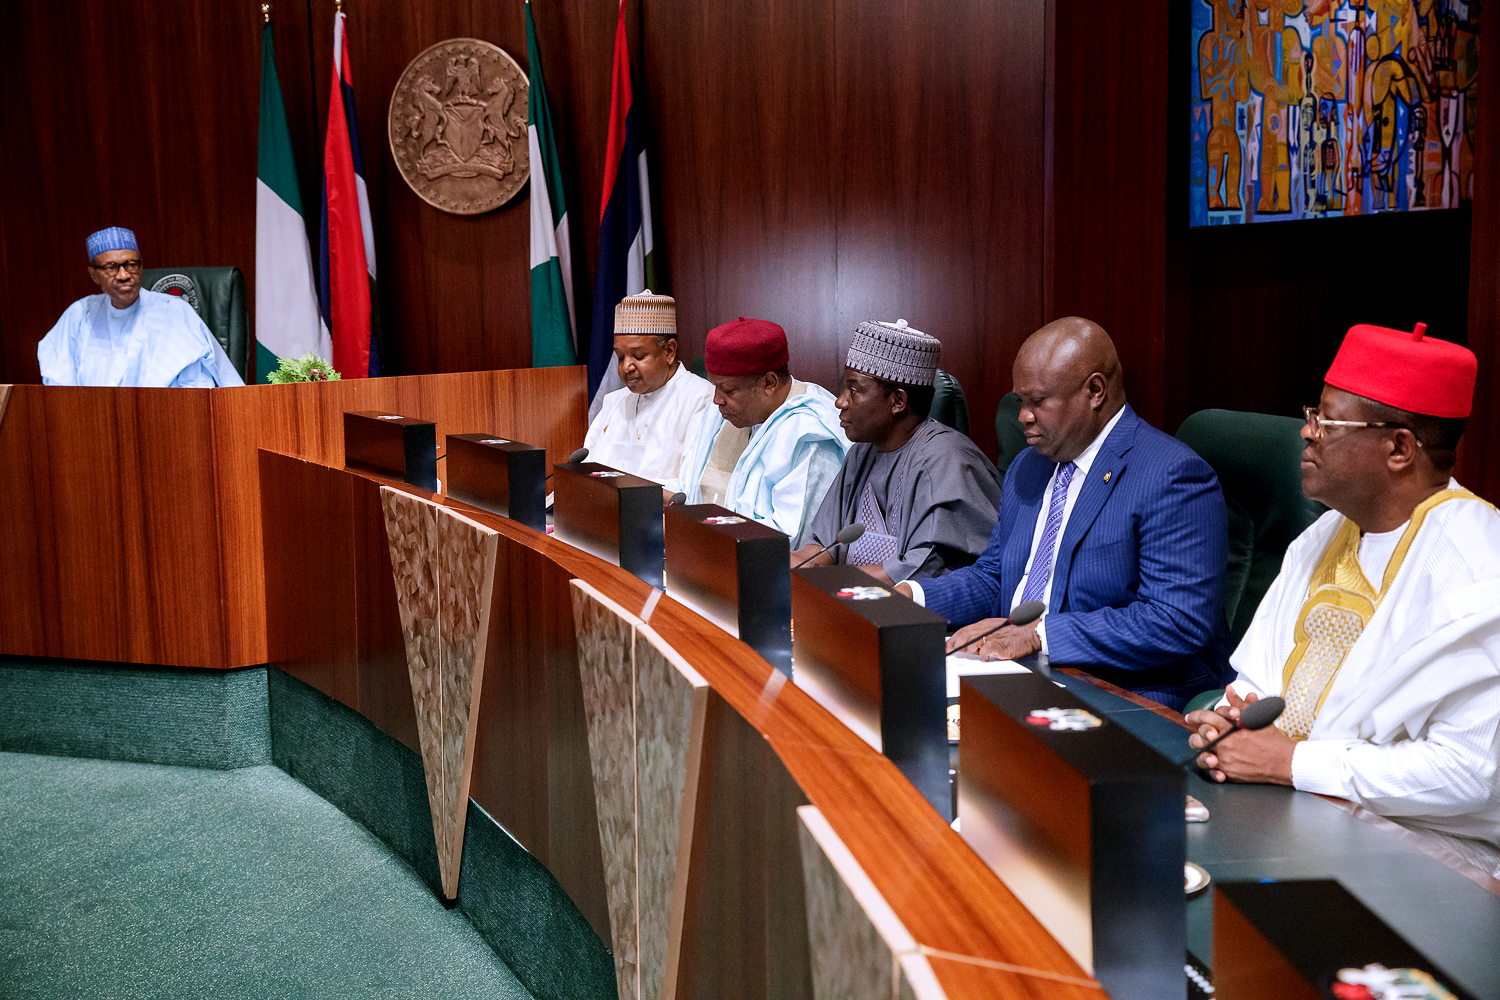 President Muhammadu Buhari (left); Lagos State Governor, Mr. Akinwunmi Ambode (2nd right); Governor David Umahi of Ebonyi State (right); Governor of Plateau State, Barr. Simon Lalong (3rd right); Governor Darius Ishaku of Taraba State (3rd left) and Governor Atiku Bagudu of Kebbi State (2nd left) during the inauguration of National Food Security Council by the President at the Council Chamber, Presidential Villa, Abuja, on Monday, March 26, 2018.